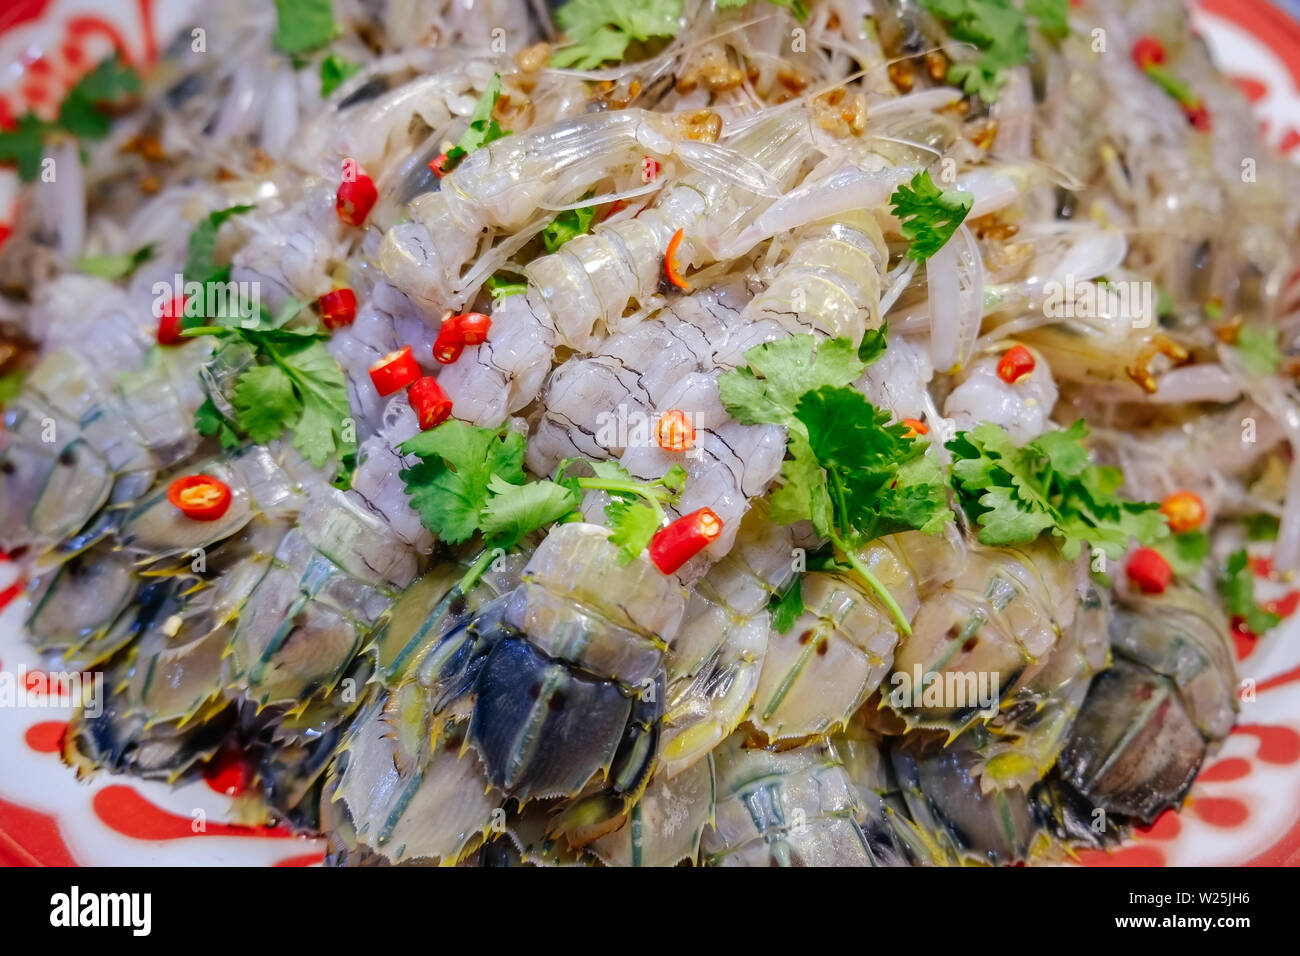 Pile of raw spicy and sour mantis shrimp for sale in a local fresh market in Bangkok, Thailand. Ready to eat food. Stock Photo